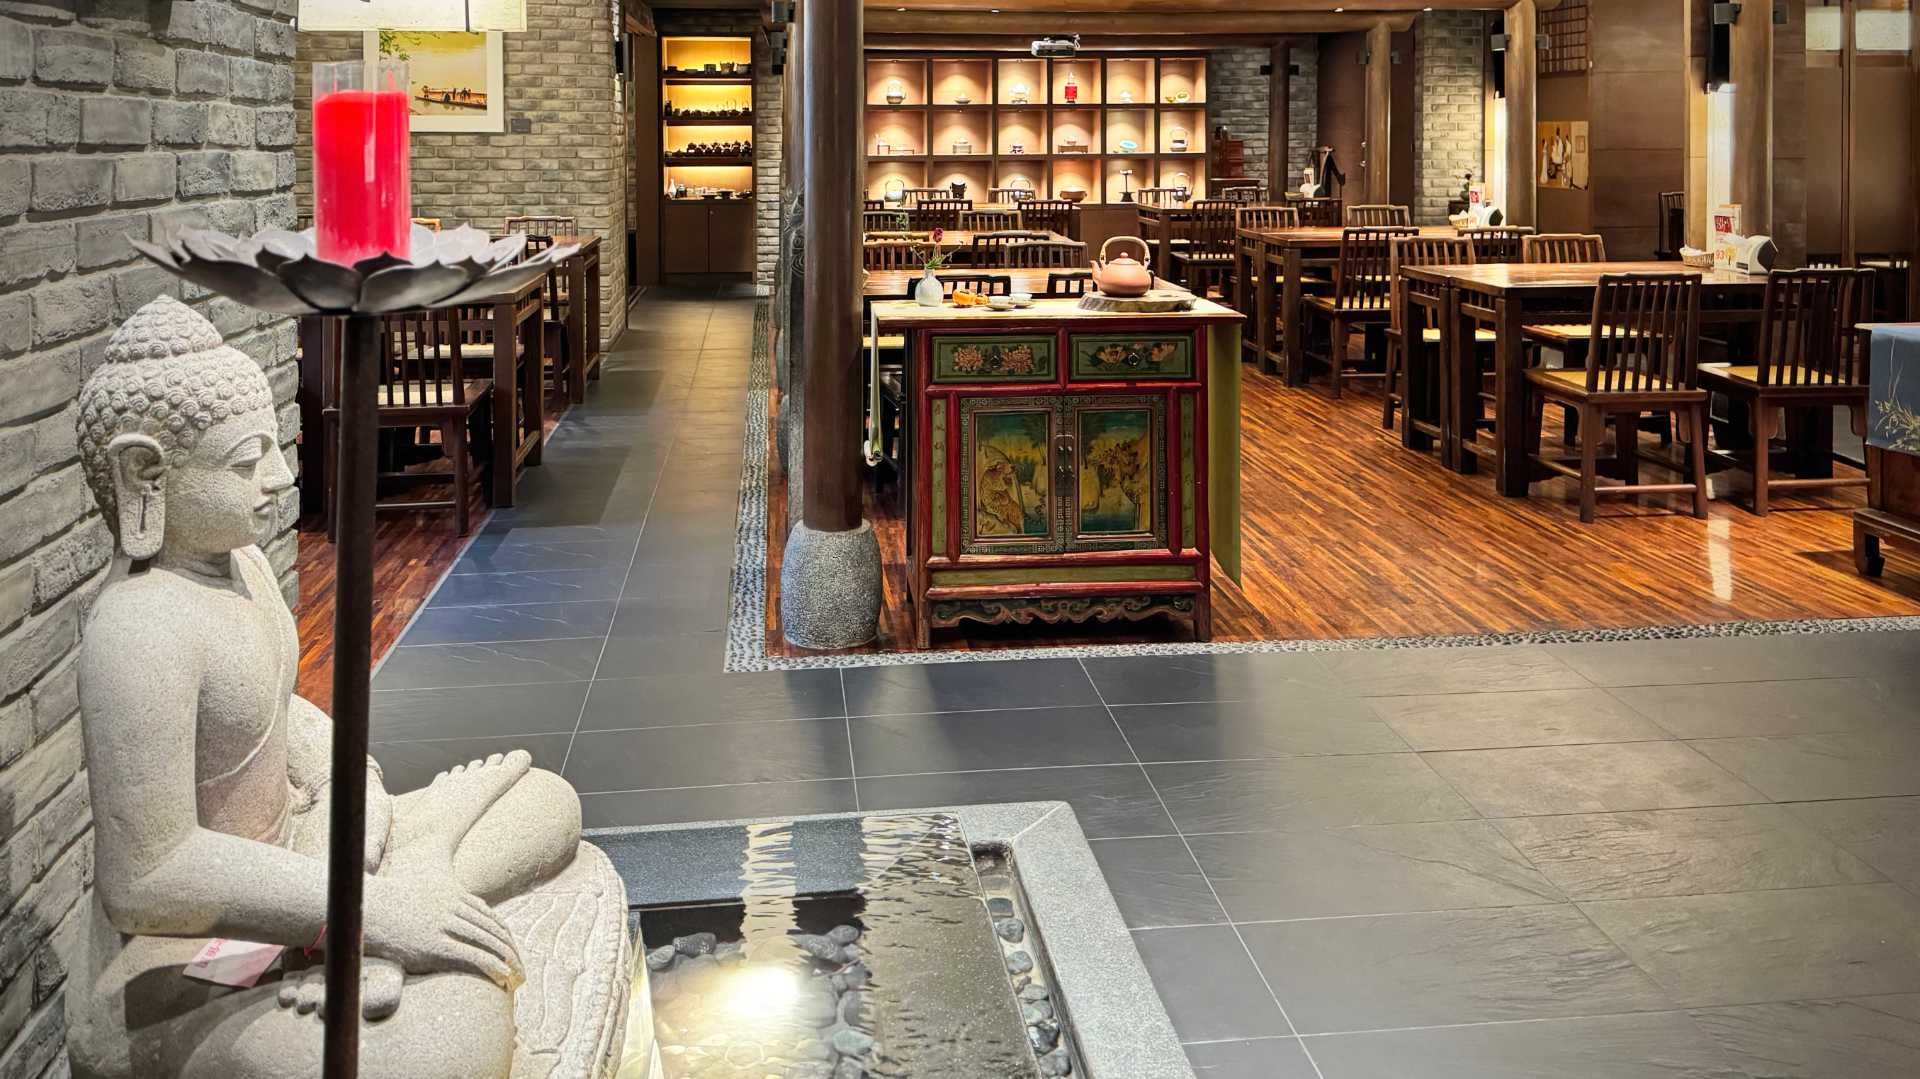 An empty teahouse, with Buddha statue in the foreground. An elaborately-painted side cabinet with a teapot on top is visible in the center of the room, with numerous four-seater wooden tables beyond it.